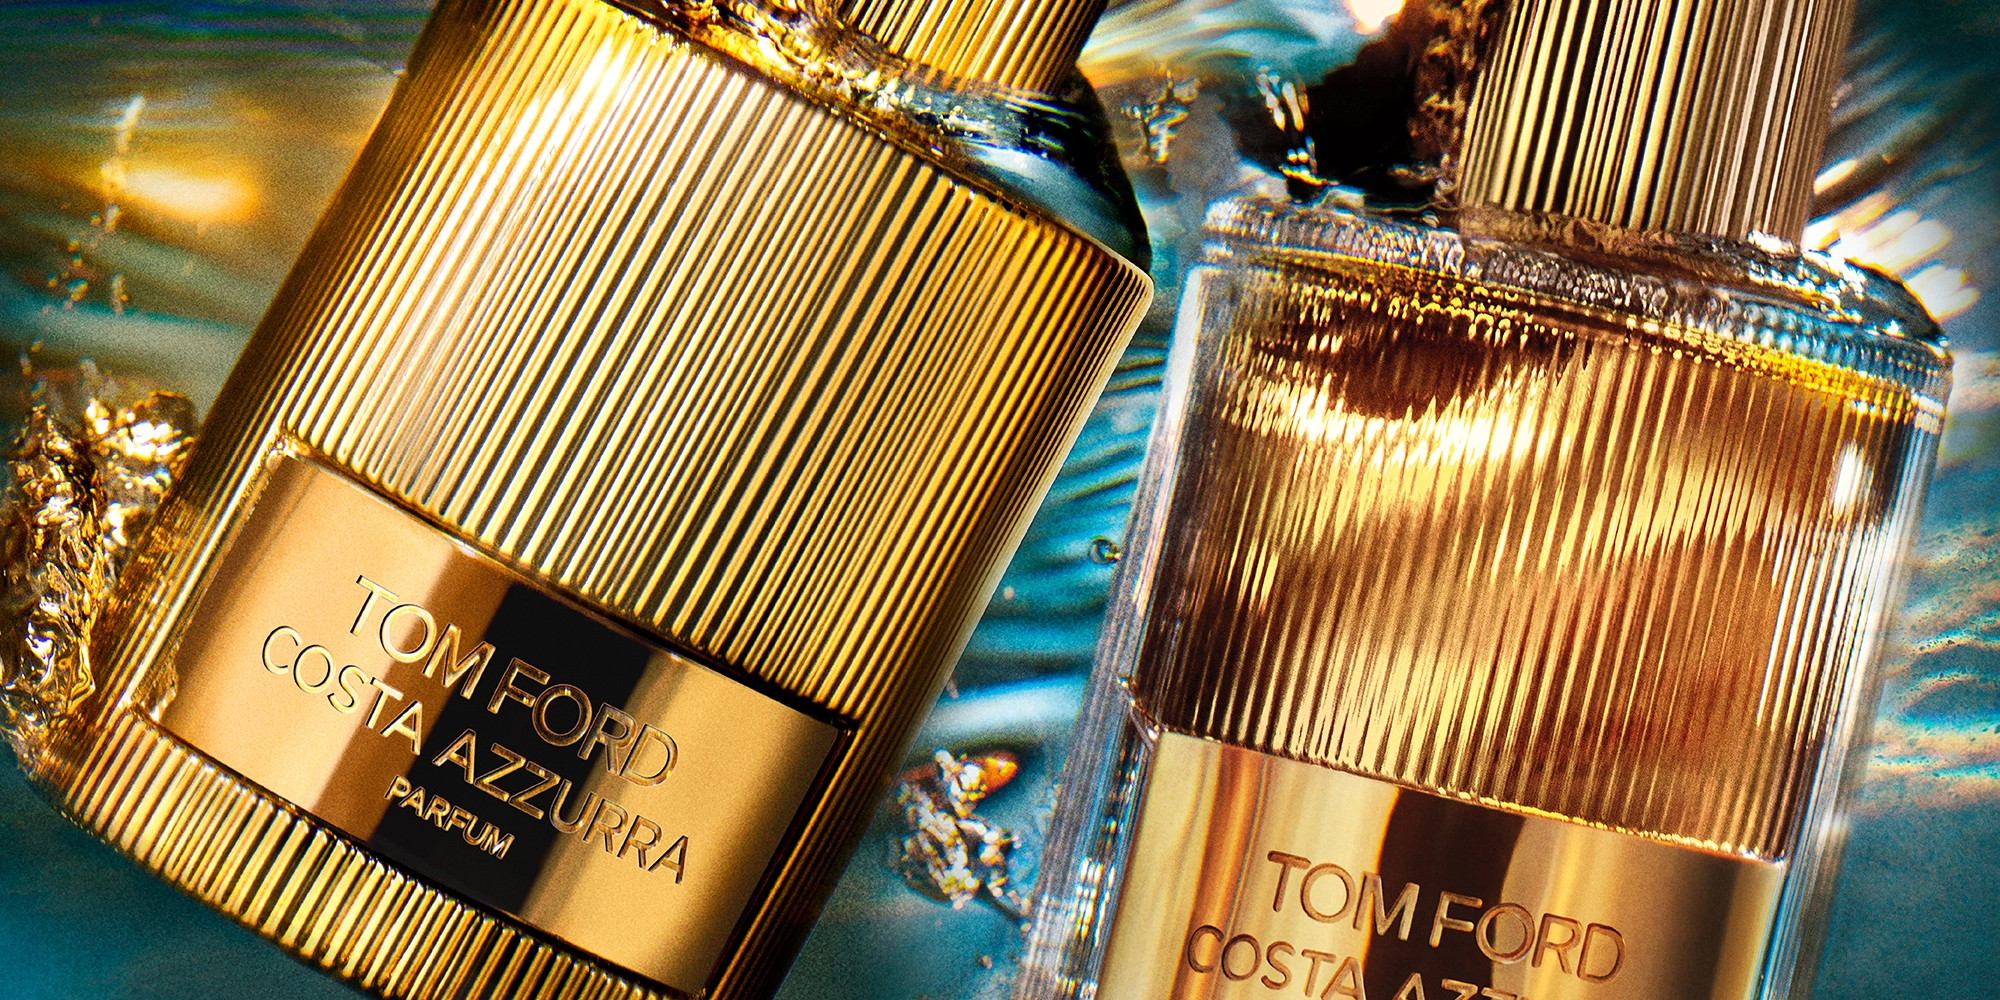 TOM FORD BEAUTY COSTA AZZURRA PARFUM COLLECTION